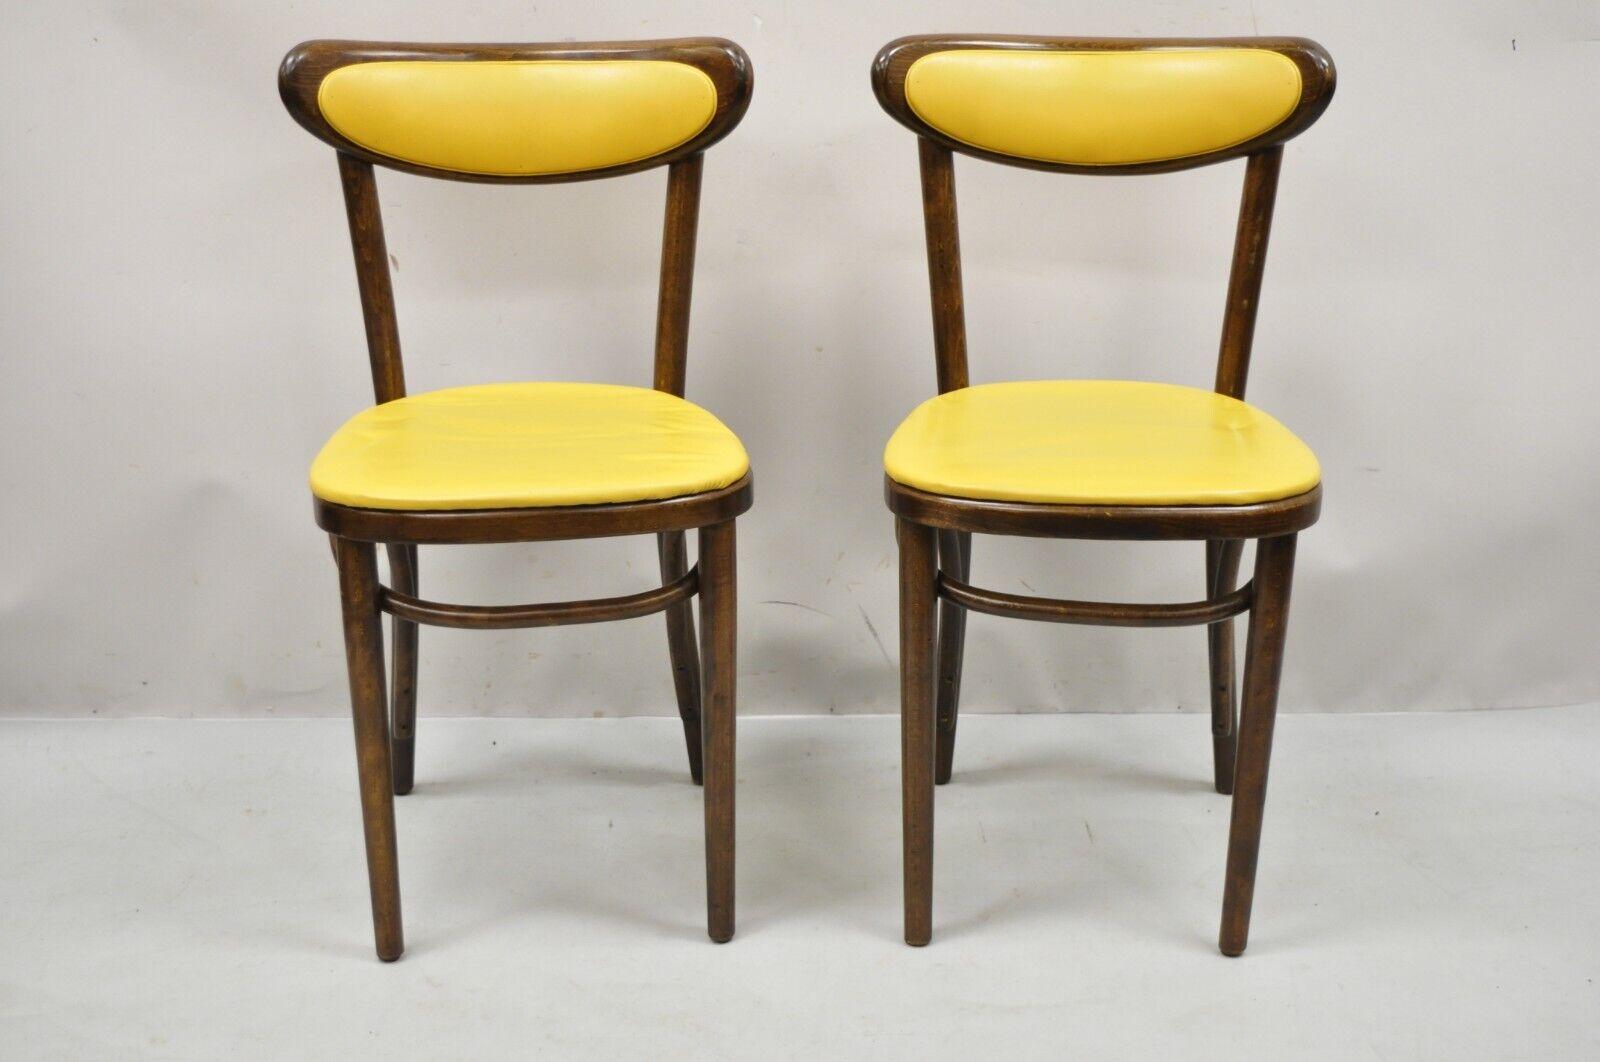 Vintage GAR Products yellow bentwood ice cream parlor side chairs - a Pair. Item features a bentwood frame, yellow vinyl upholstery, original label, very nice vintage pair, great style and form. Circa Mid 20th Century. Measurements: 32